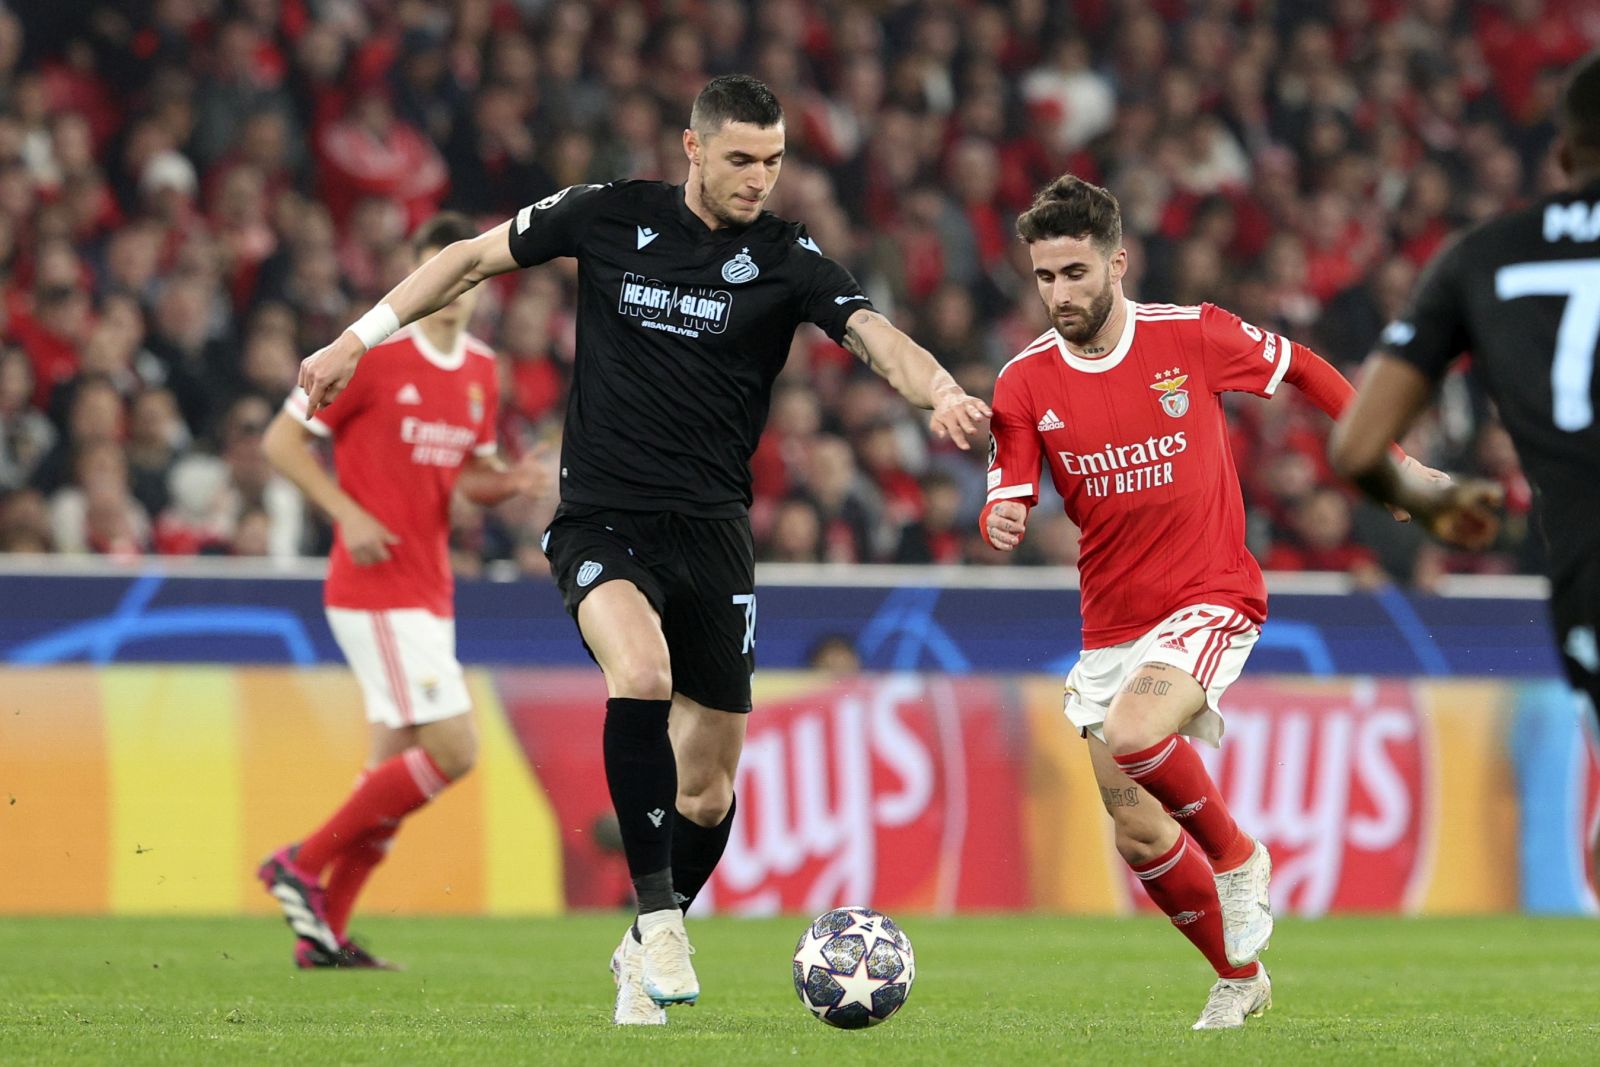 epa10508140 Benfica's Rafa Silva (R) fights for the ball with Club Brugge's Roman Yaremchuk during the UEFA Champions League second leg soccer match between Benfica and Club Brugge, in Lisbon, Portugal, 07 March 2023.  EPA/TIAGO PETINGA